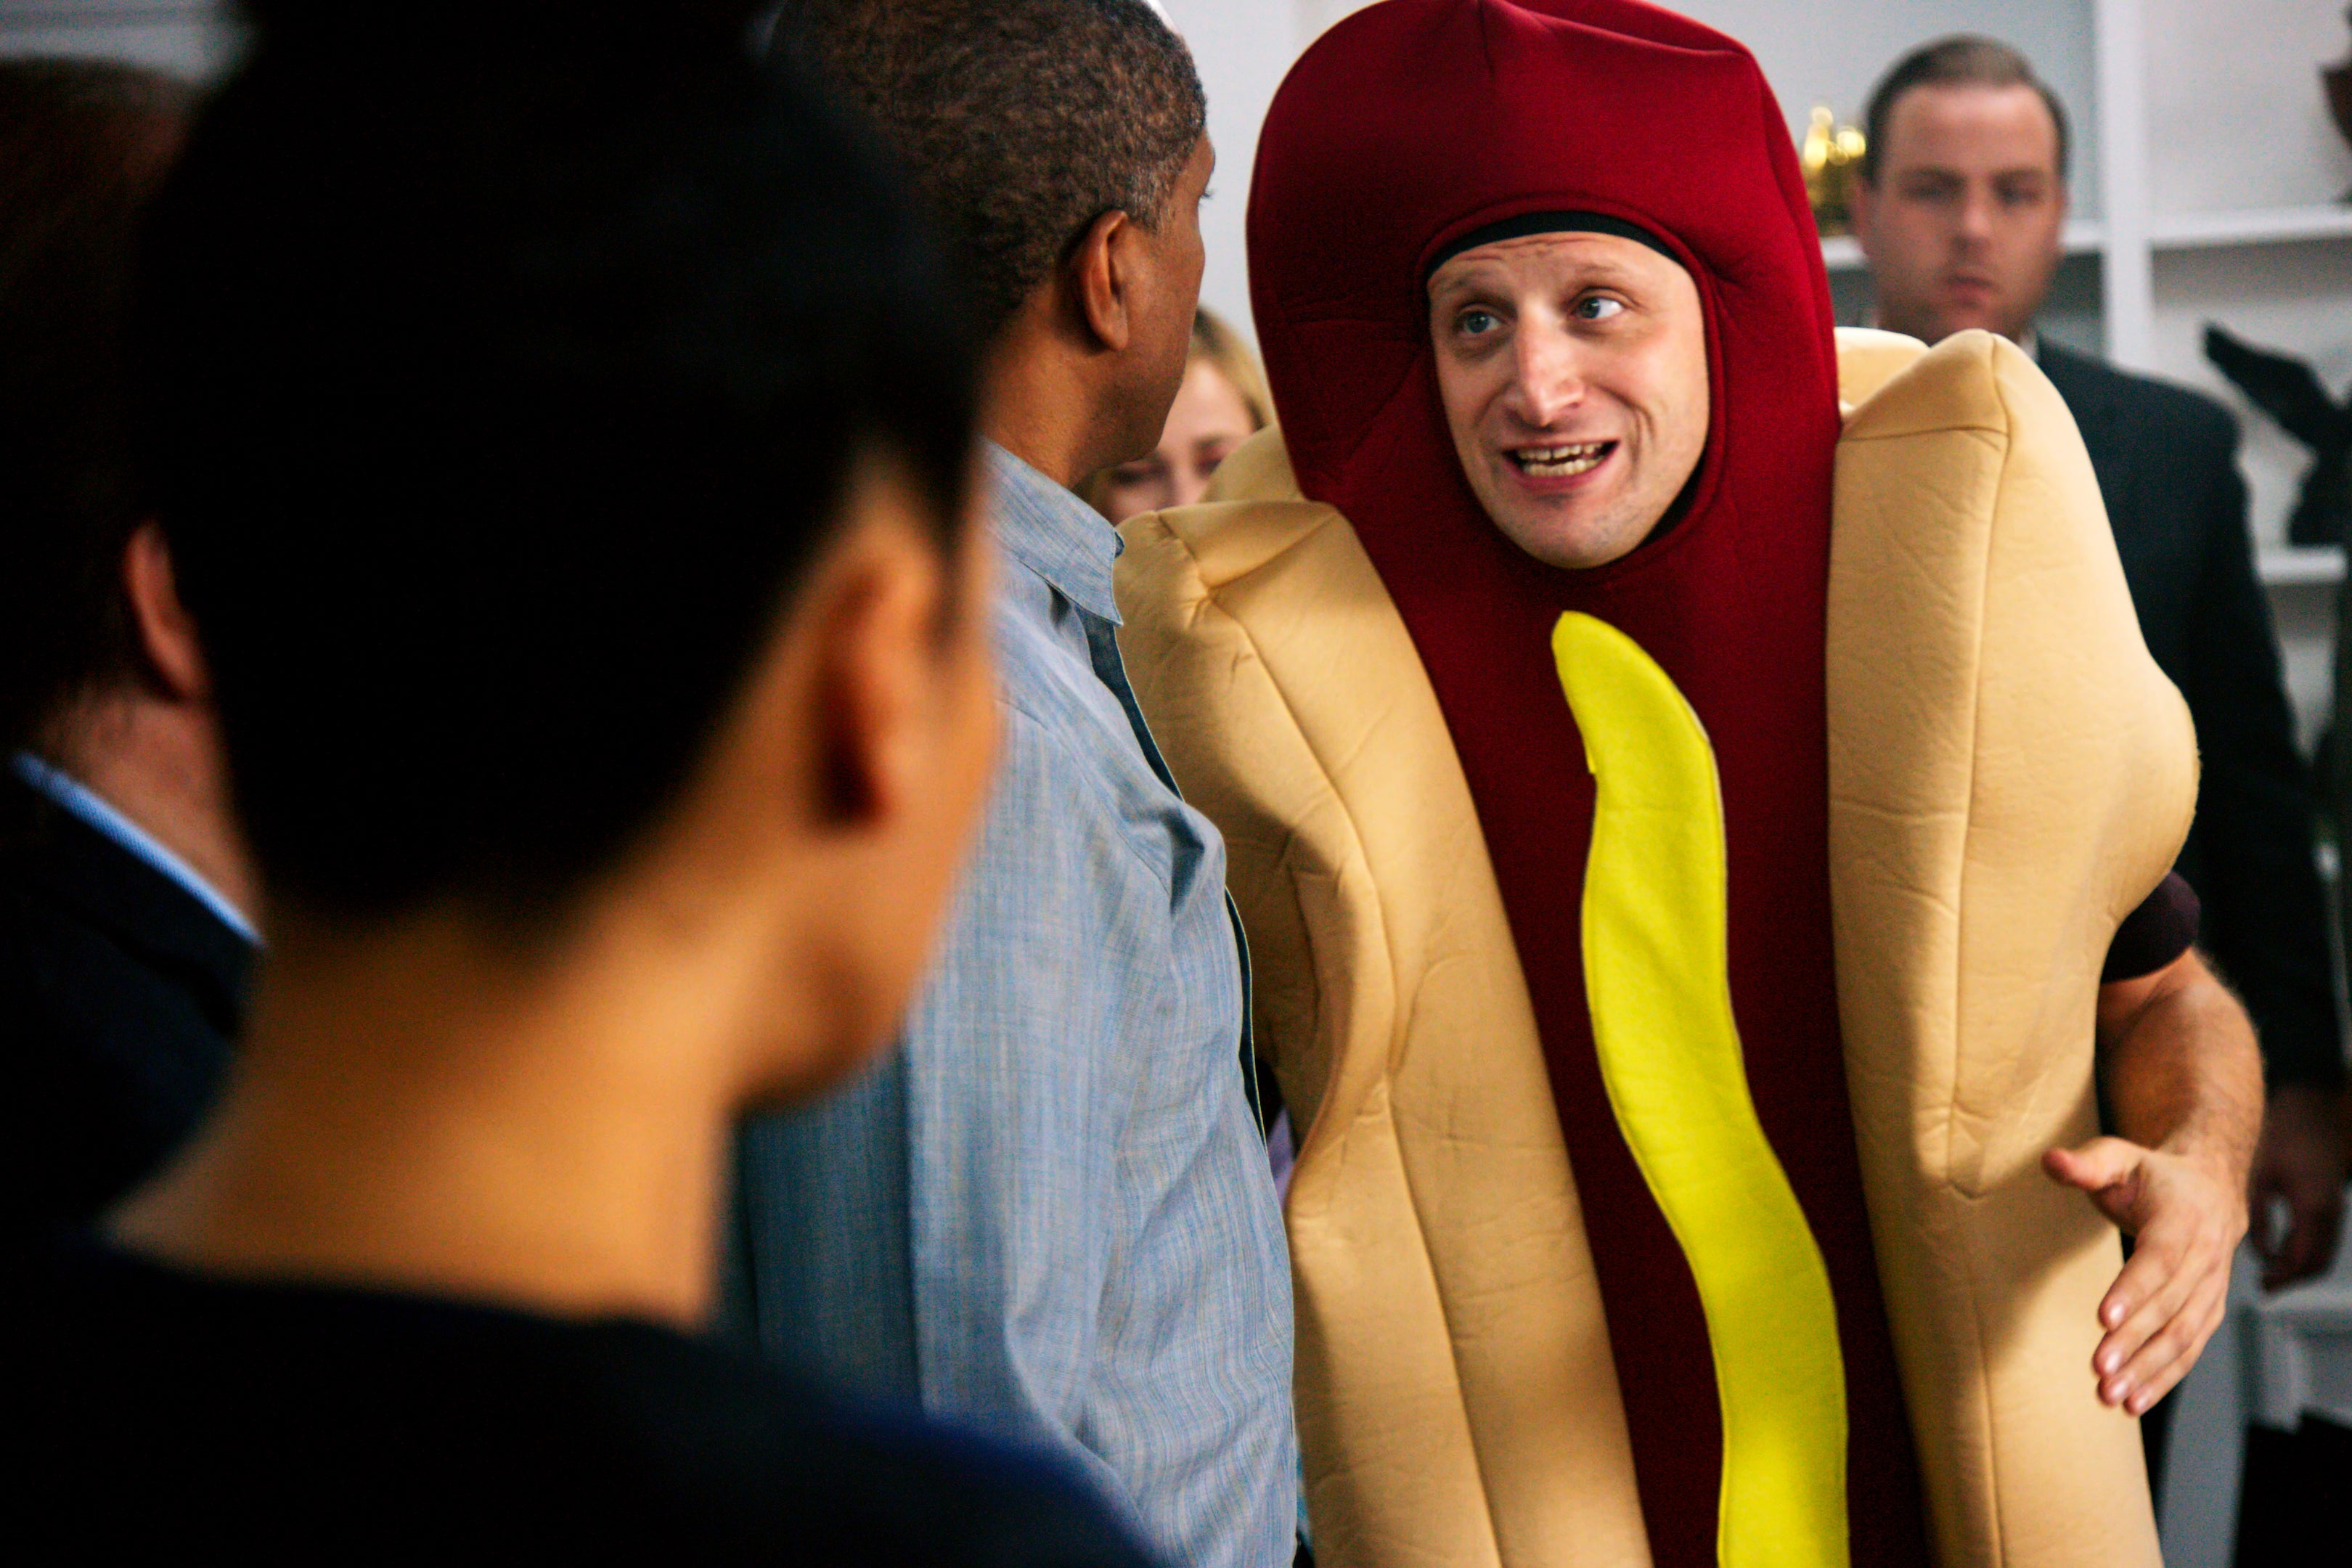 Tim Robinson stands in a crowd of people wearing a hot dog costume.